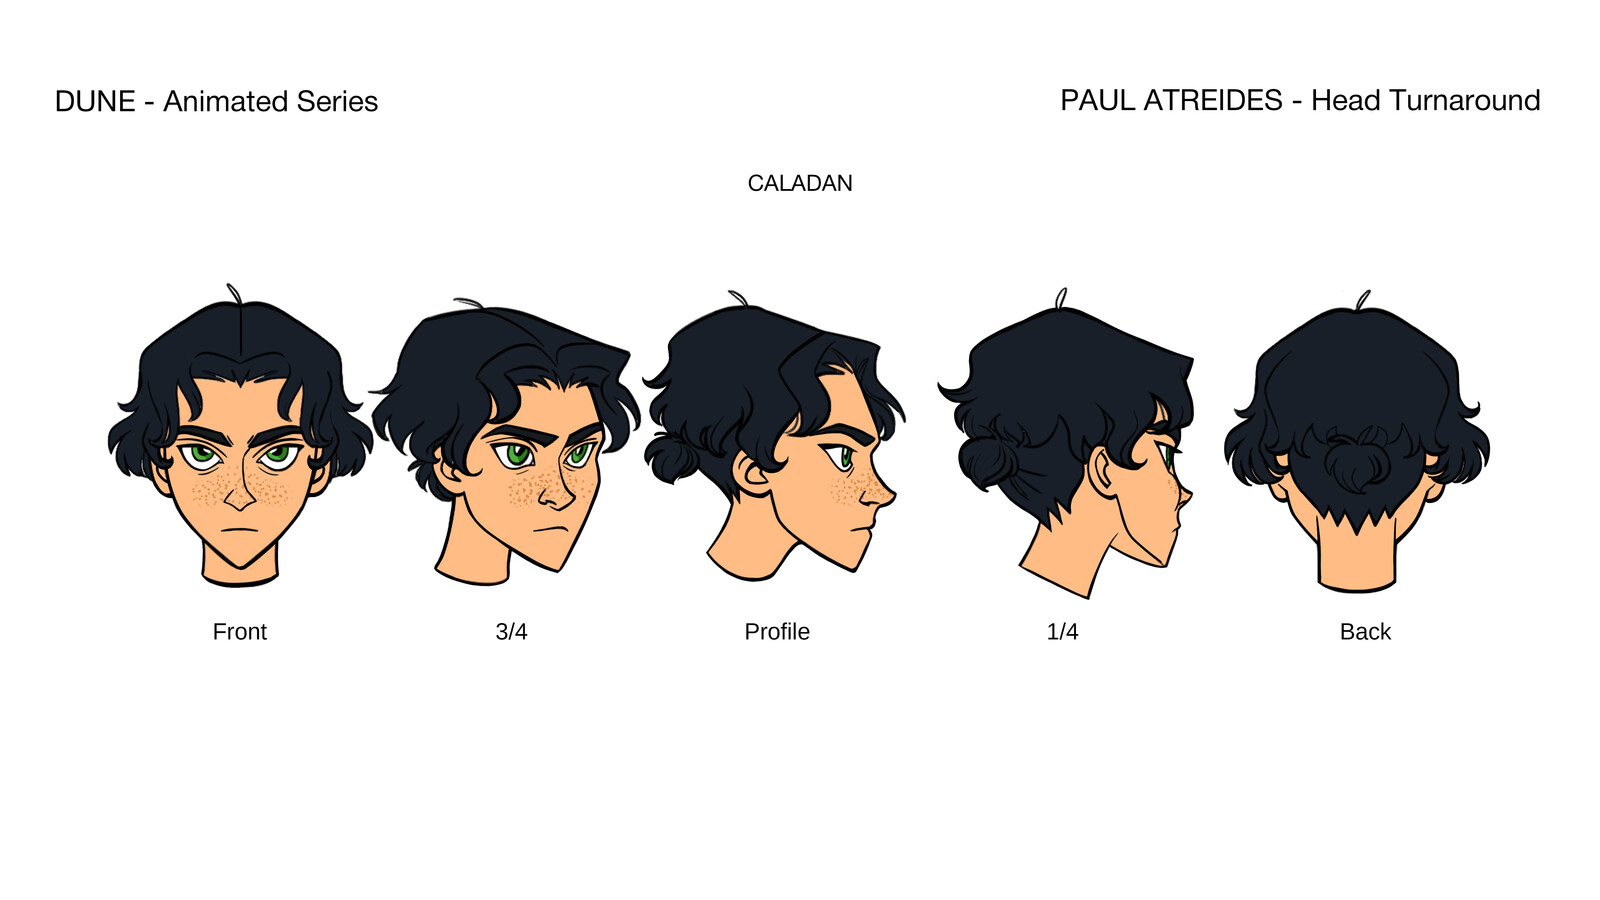 Next I move on to details and create a more precise look of the character, starting with a head turnaround.